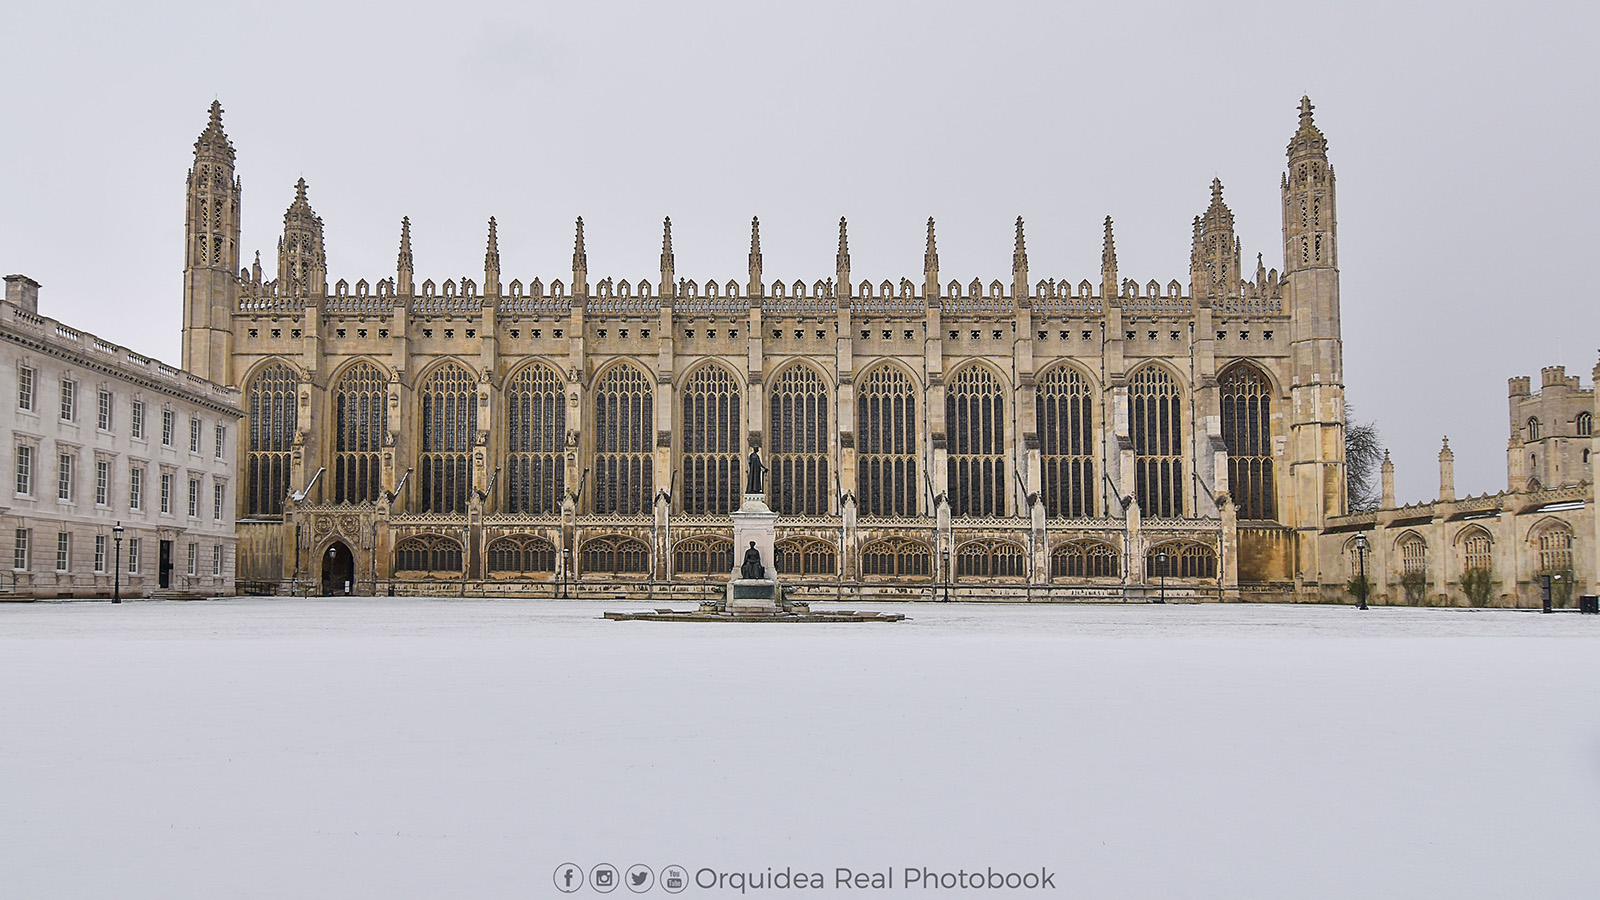 King's college chapel in the snow. 